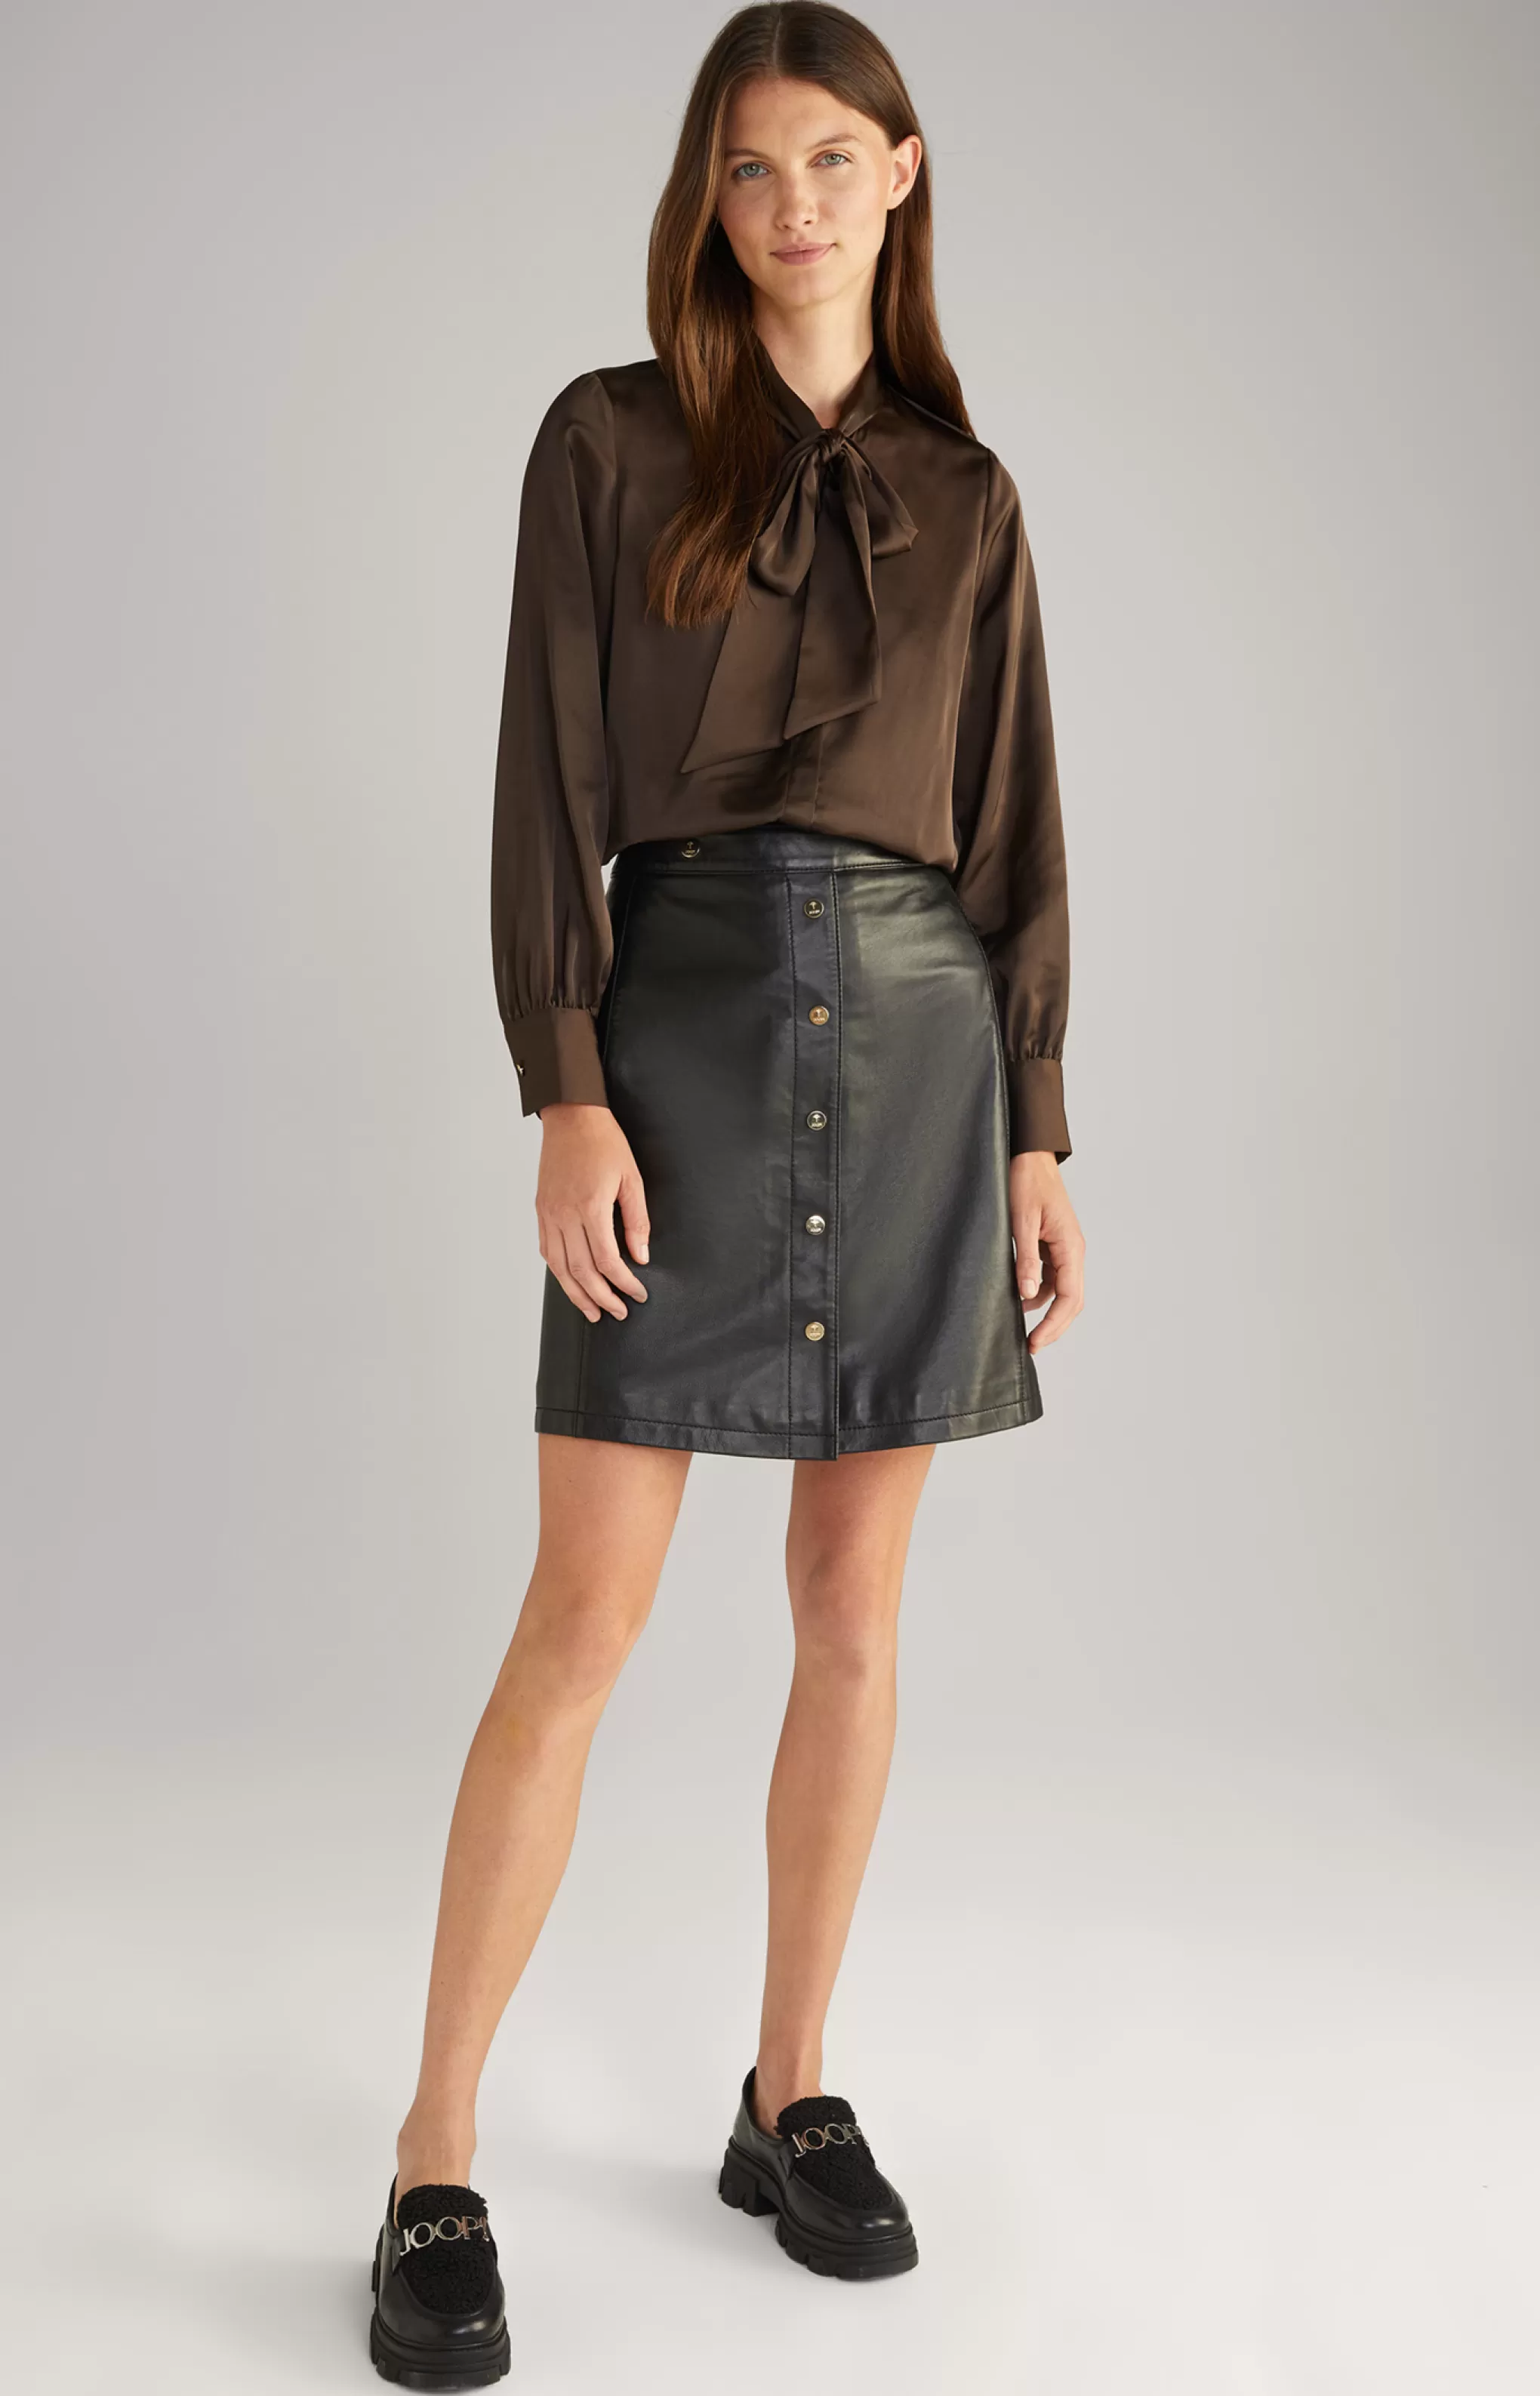 Leather | Dresses & Skirts | Clothing*JOOP Leather | Dresses & Skirts | Clothing Leather Skirt in